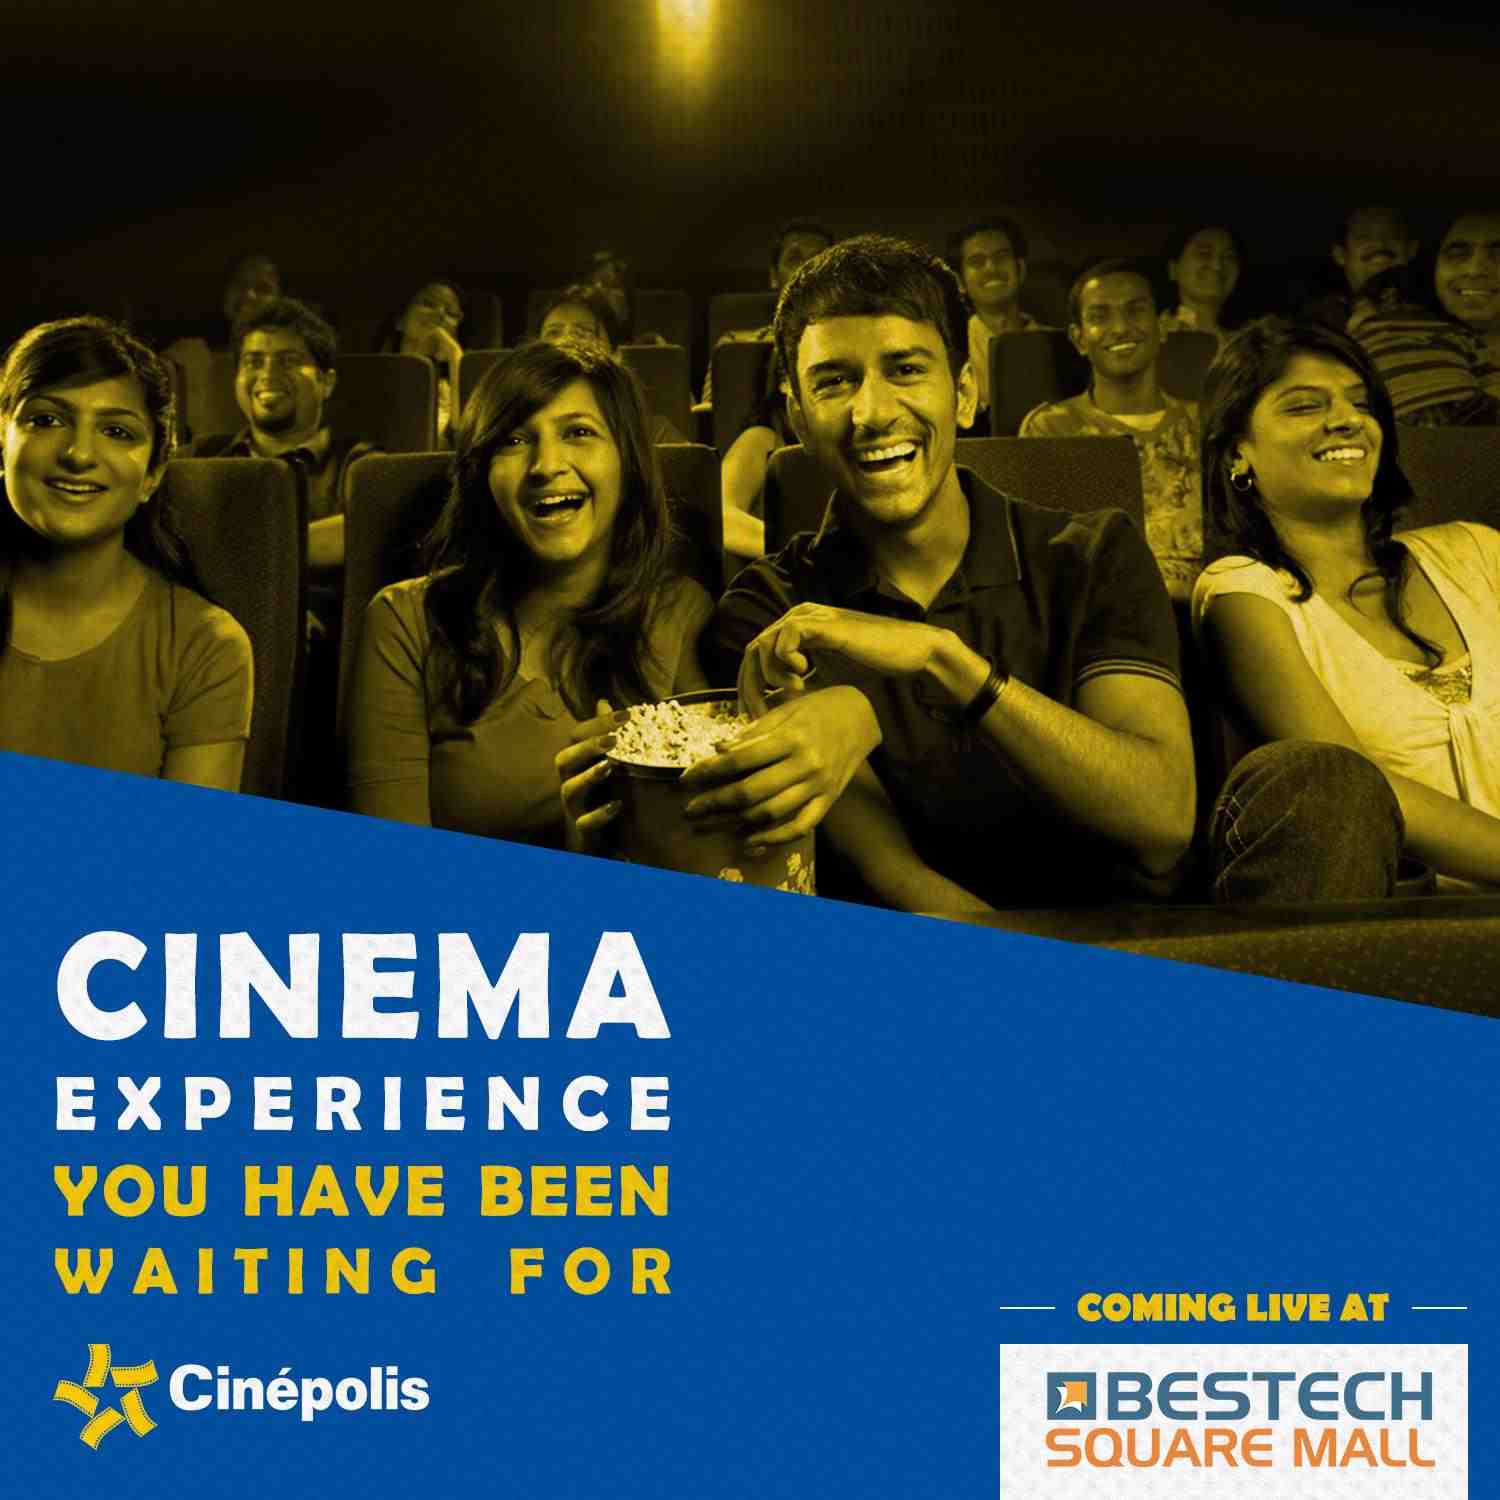 Watch all the new releases every weekend in Cinepolis at Bestech Square Mall in Mohali Update